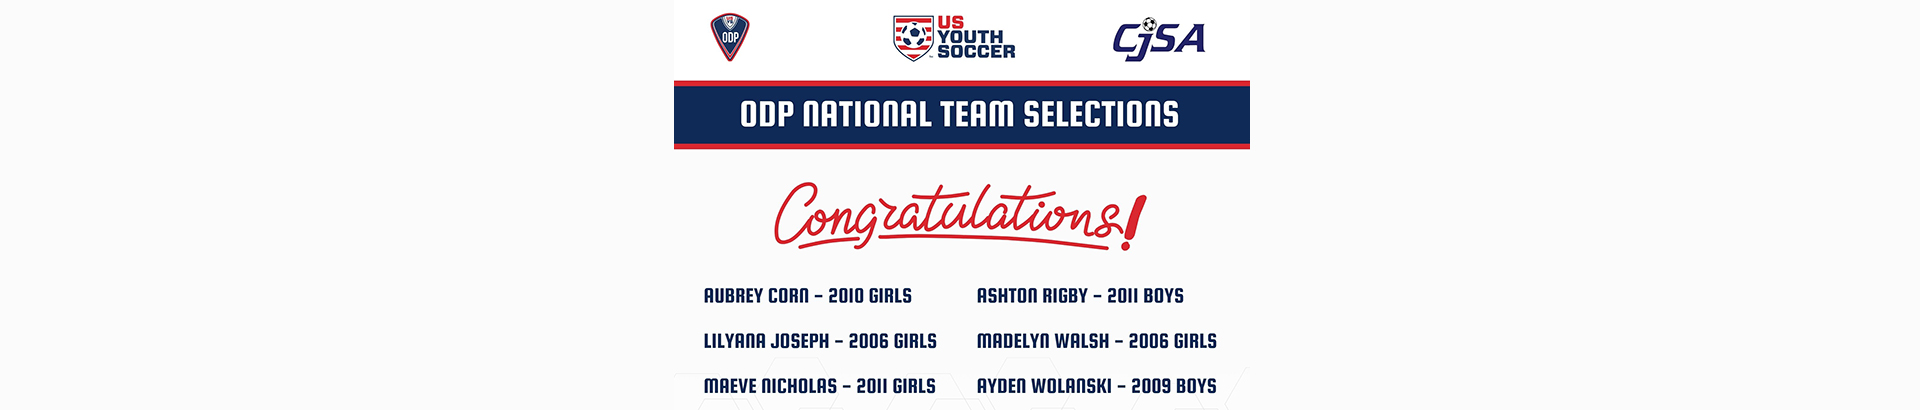 ODP National Team Selections